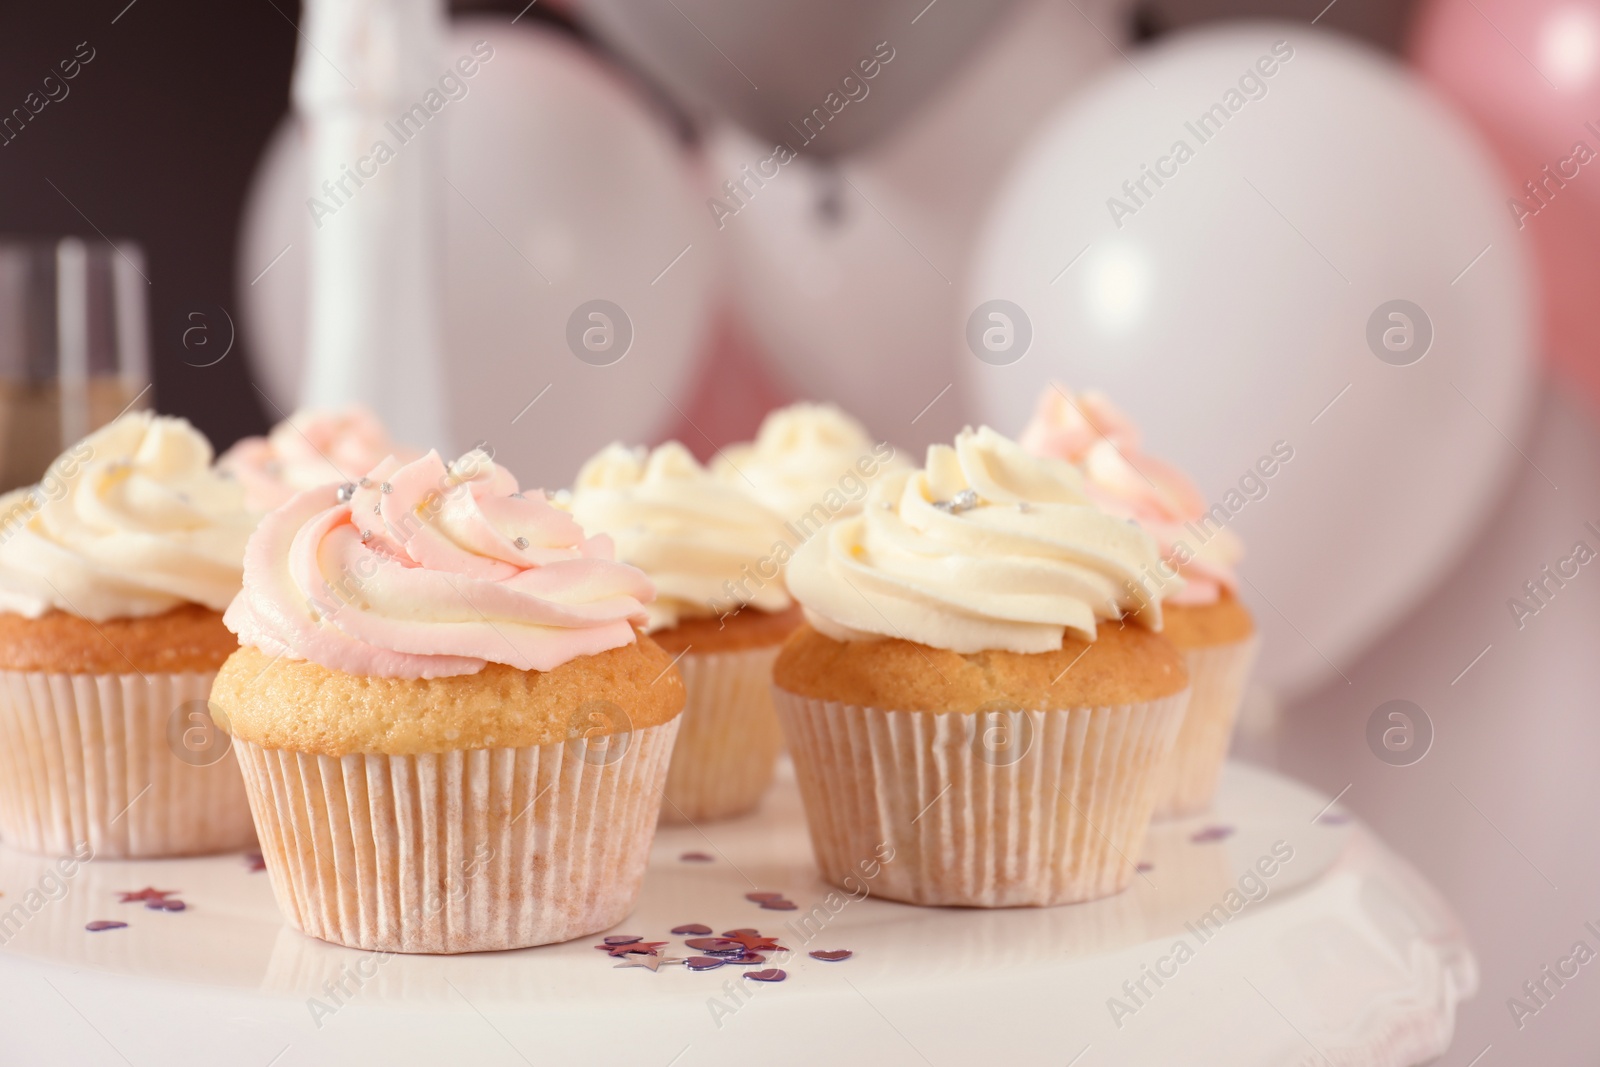 Photo of Stand with cupcakes and blurred balloons on background, closeup